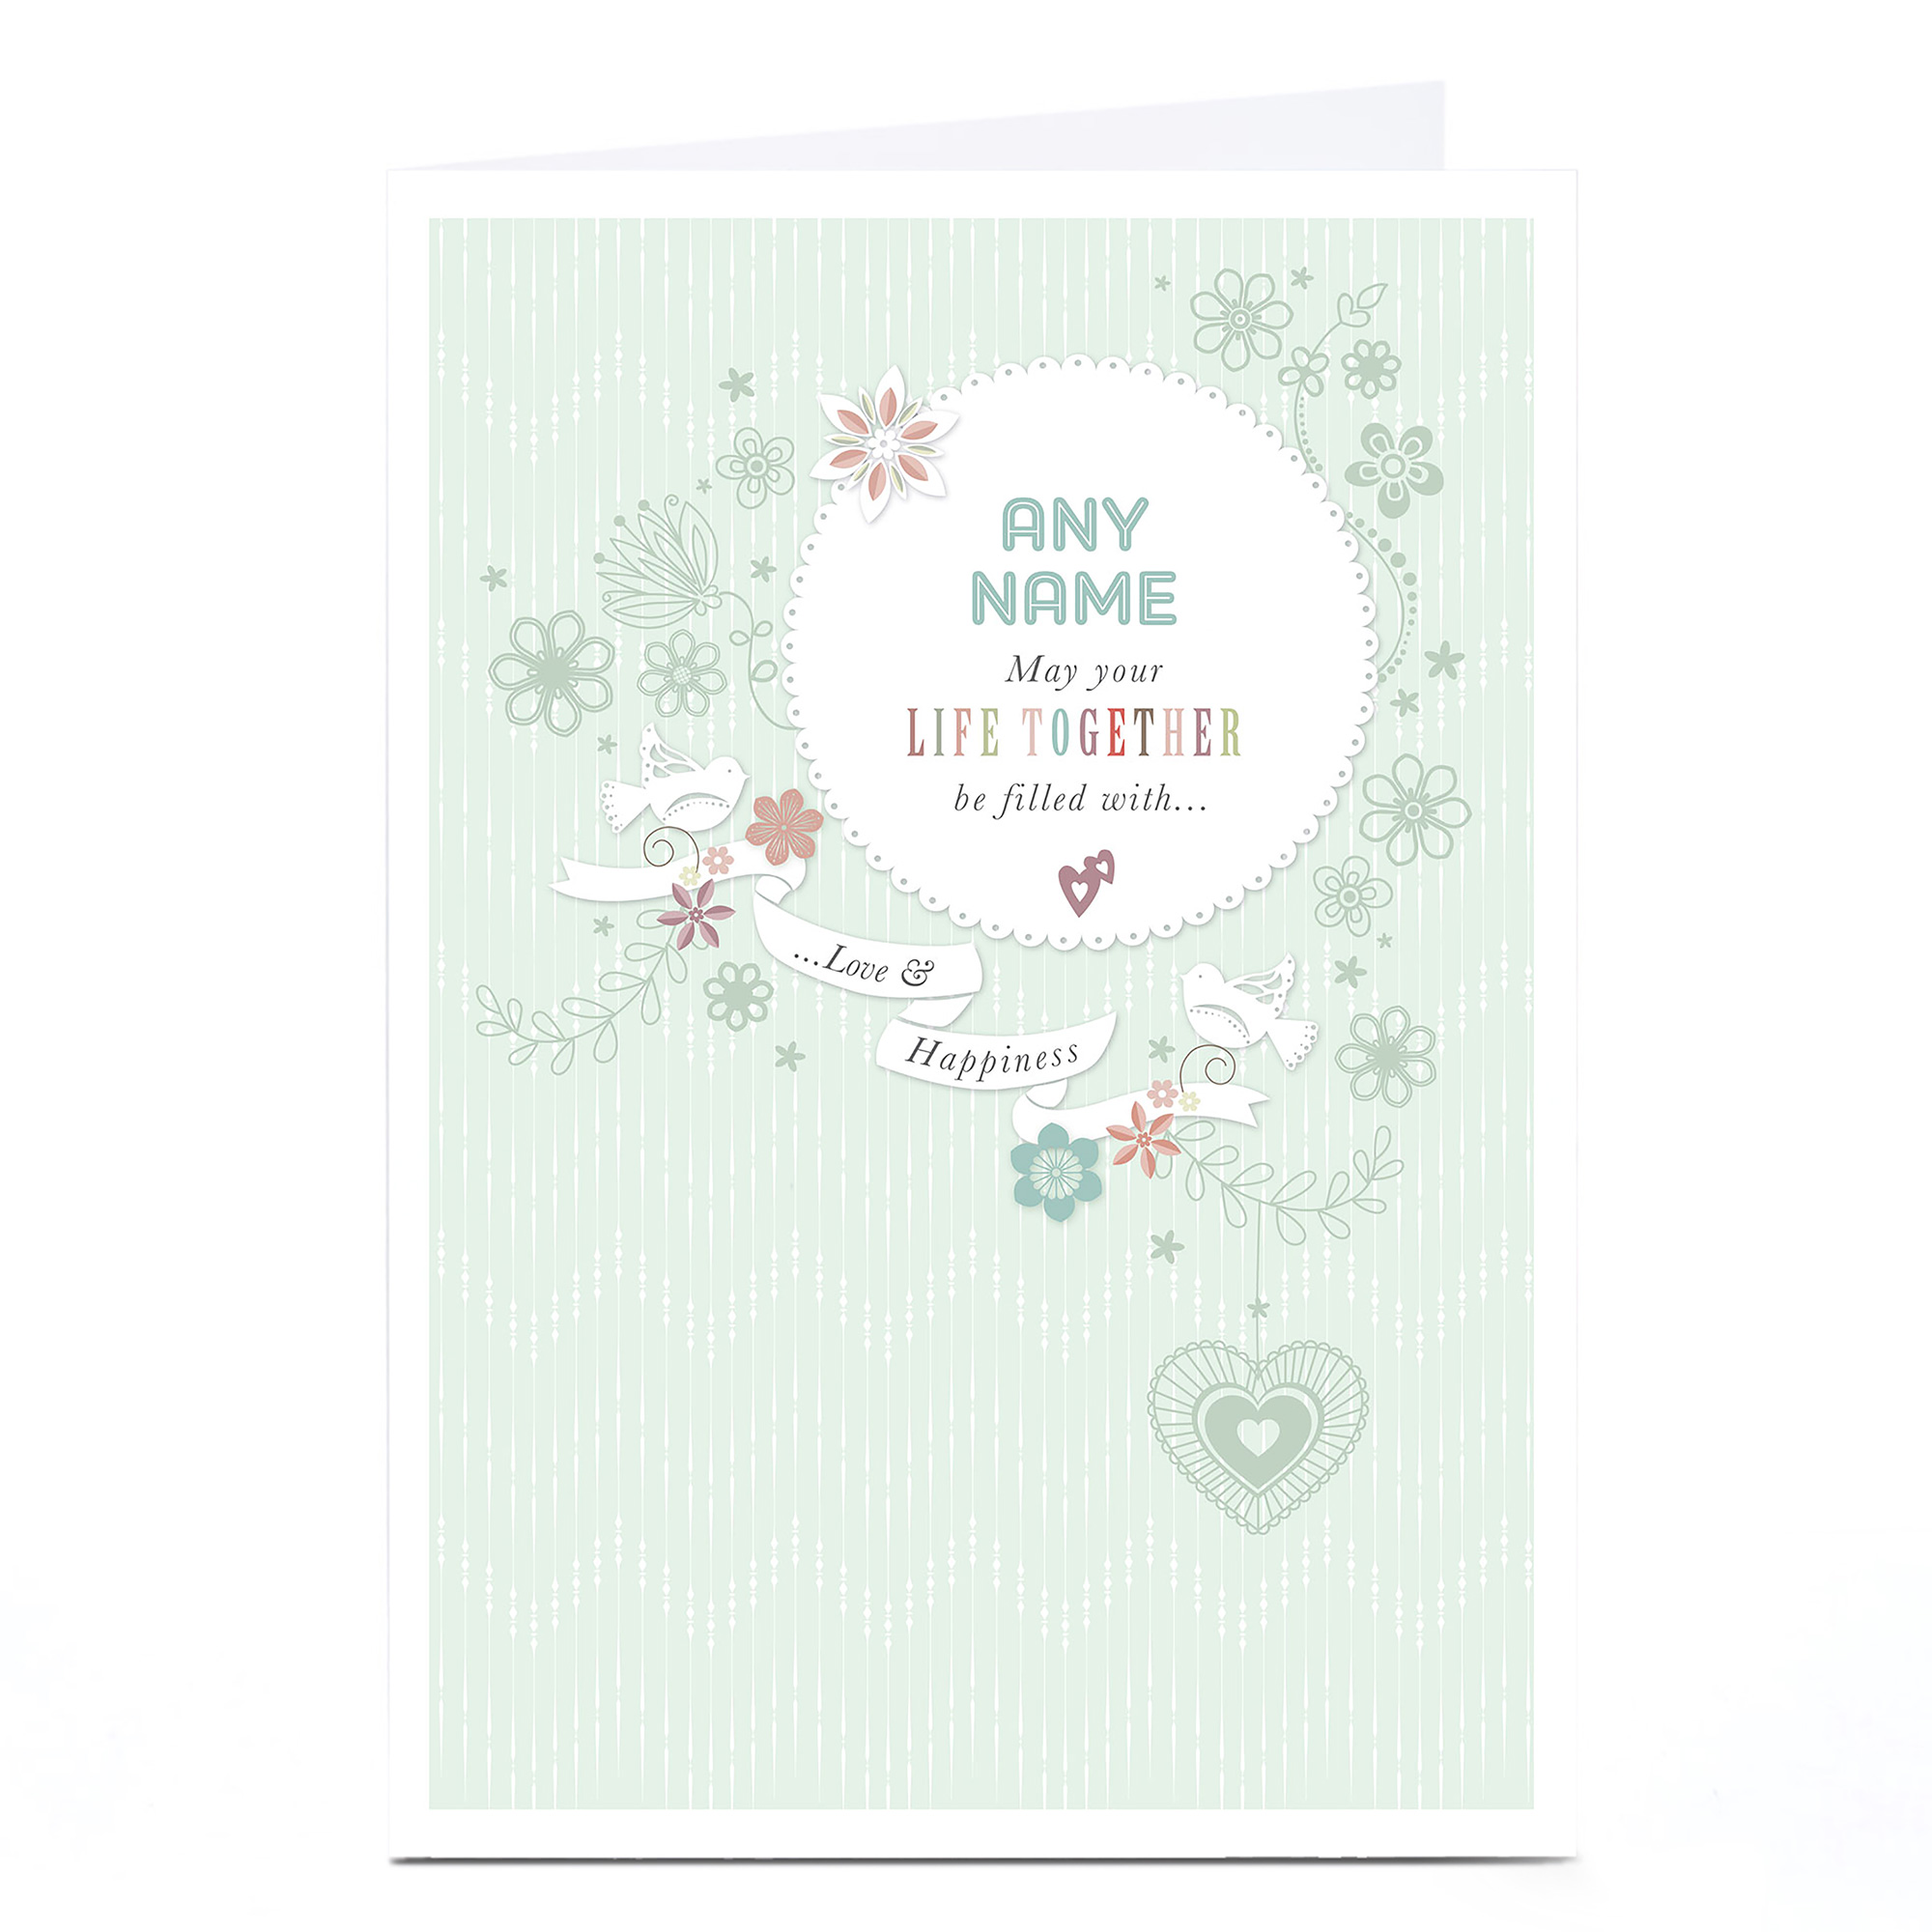 Personalised Wedding Card - Love & Happiness